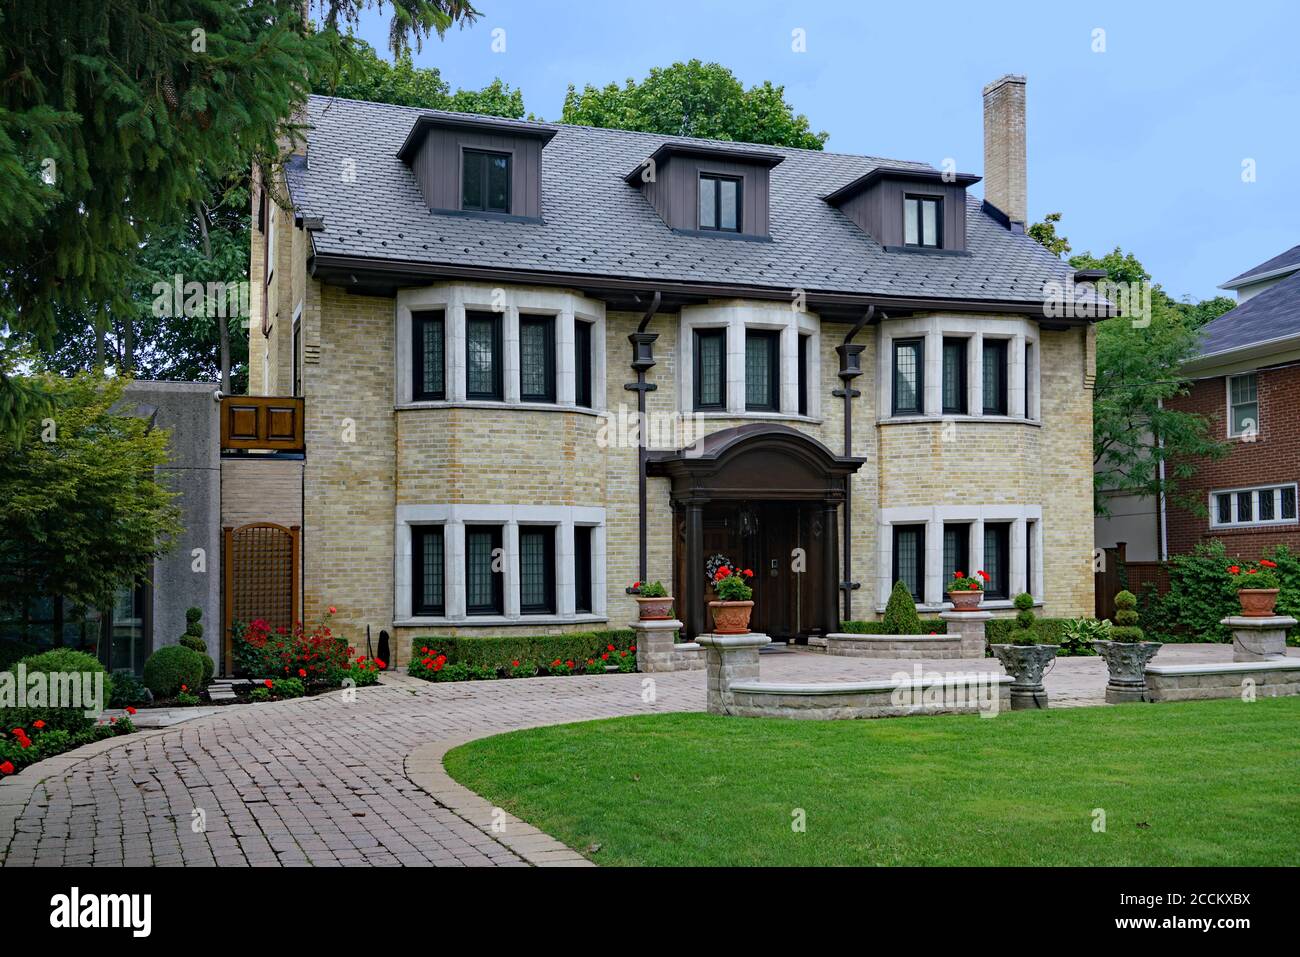 large older detached house with attractive landscaping, typical of Forest Hill or Rosedale district of Toronto Stock Photo